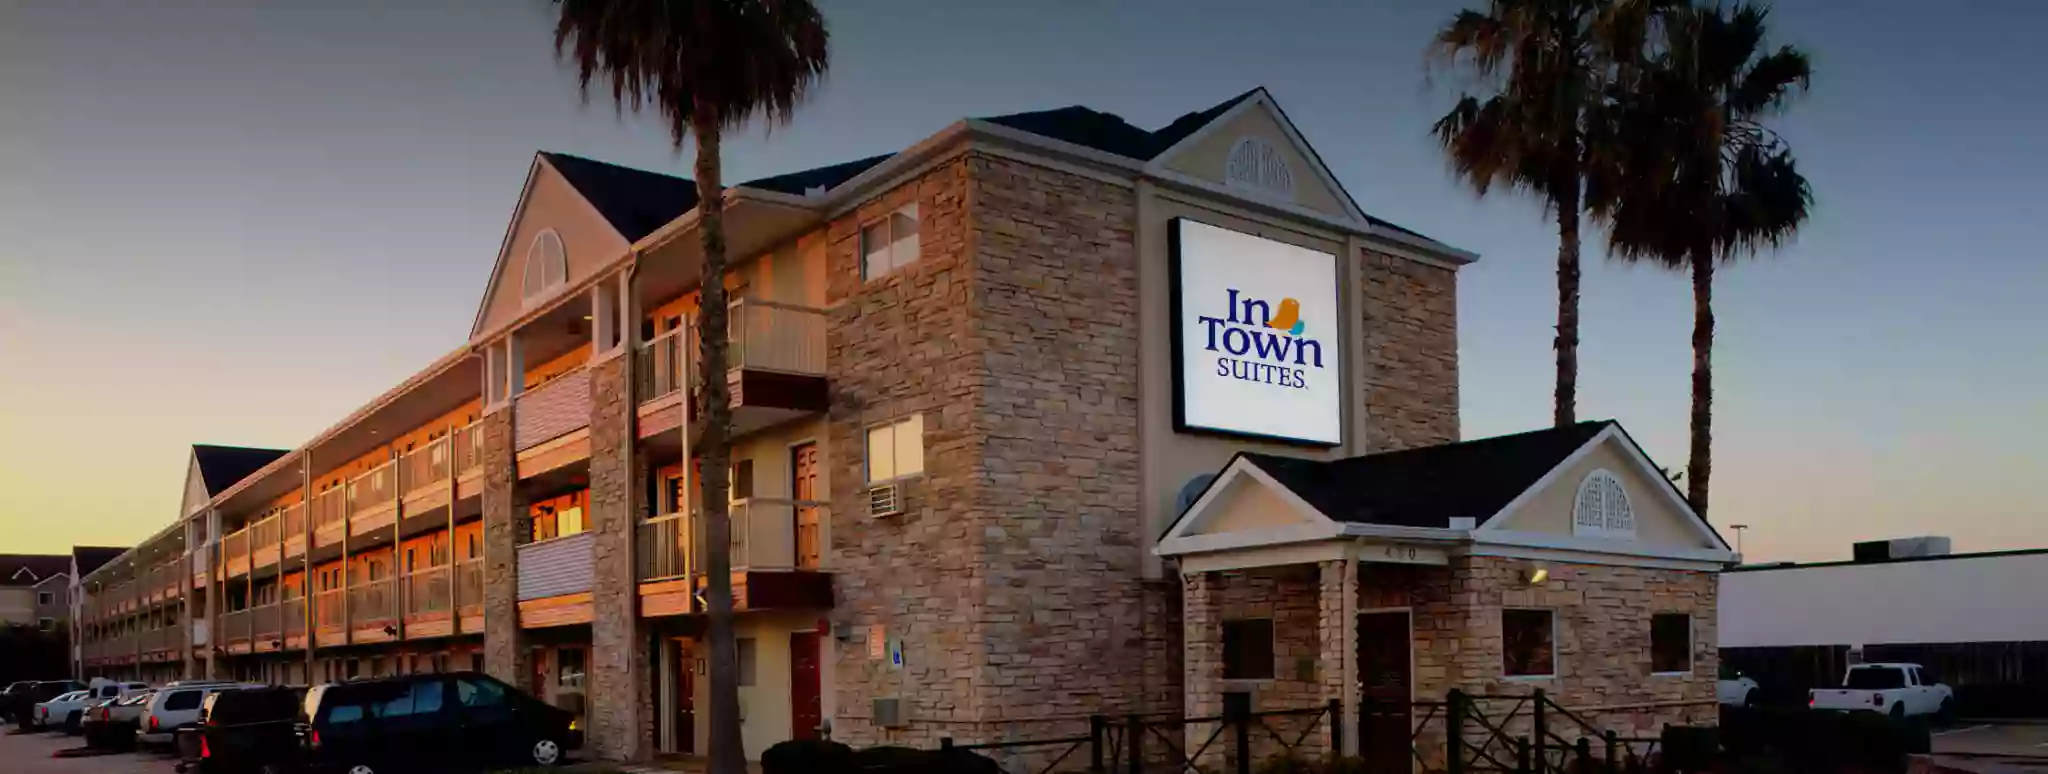 InTown Suites Extended Stay Indianapolis IN - I-70/Post Road